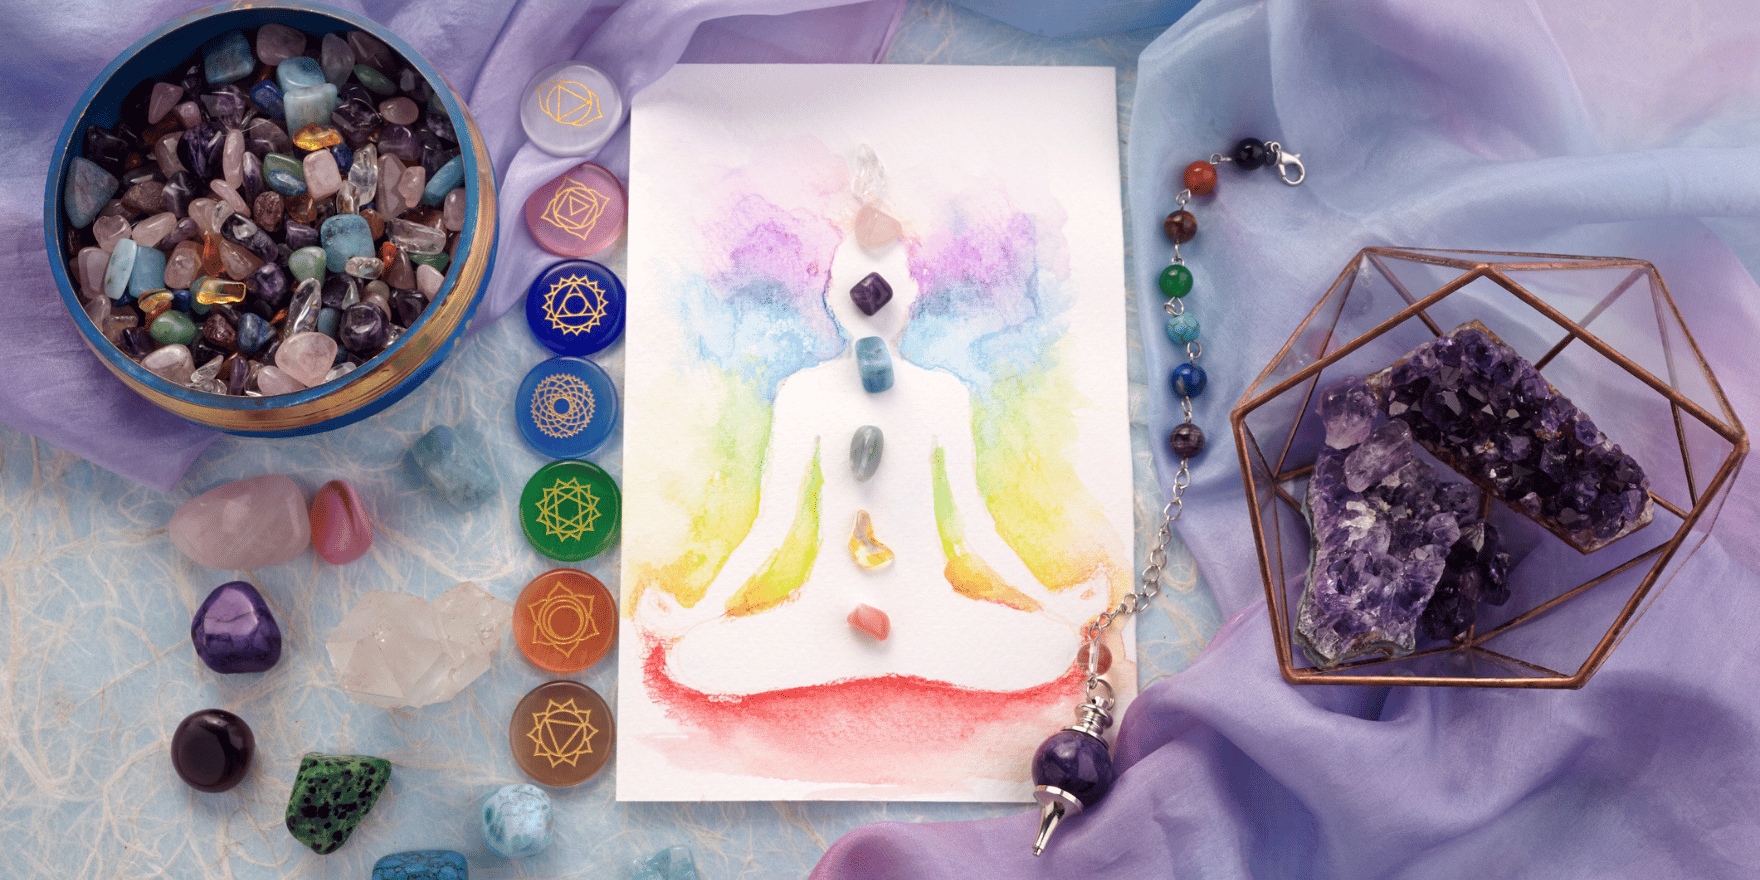 The Beginner Guide To The 7 Chakras & Quick Tips To Unblock Them